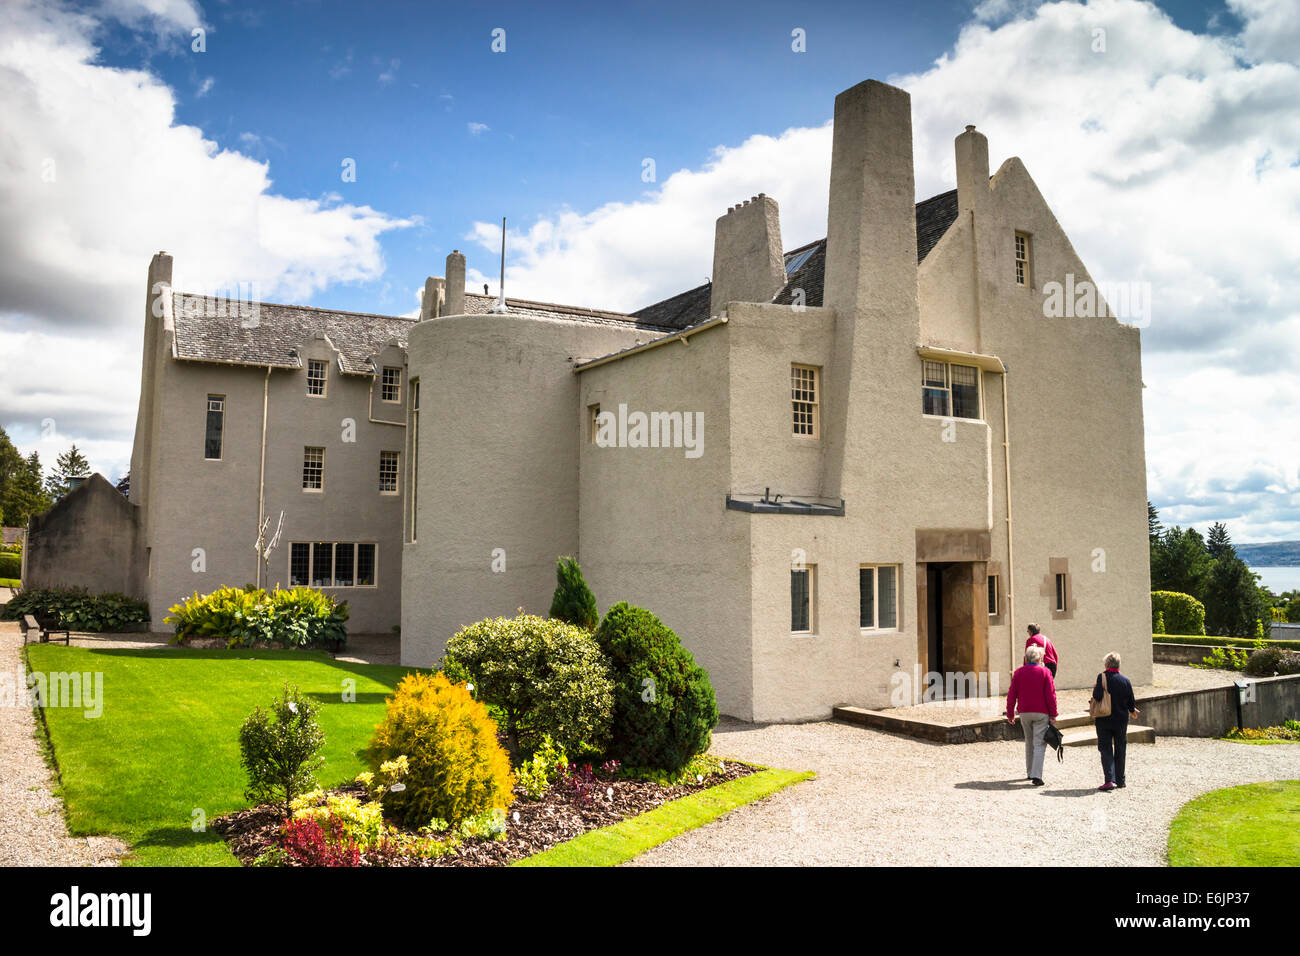 The Hill House in Helensburgh designed by Charles Rennie Mackintosh, Argyll and Bute, Scotland. Stock Photo